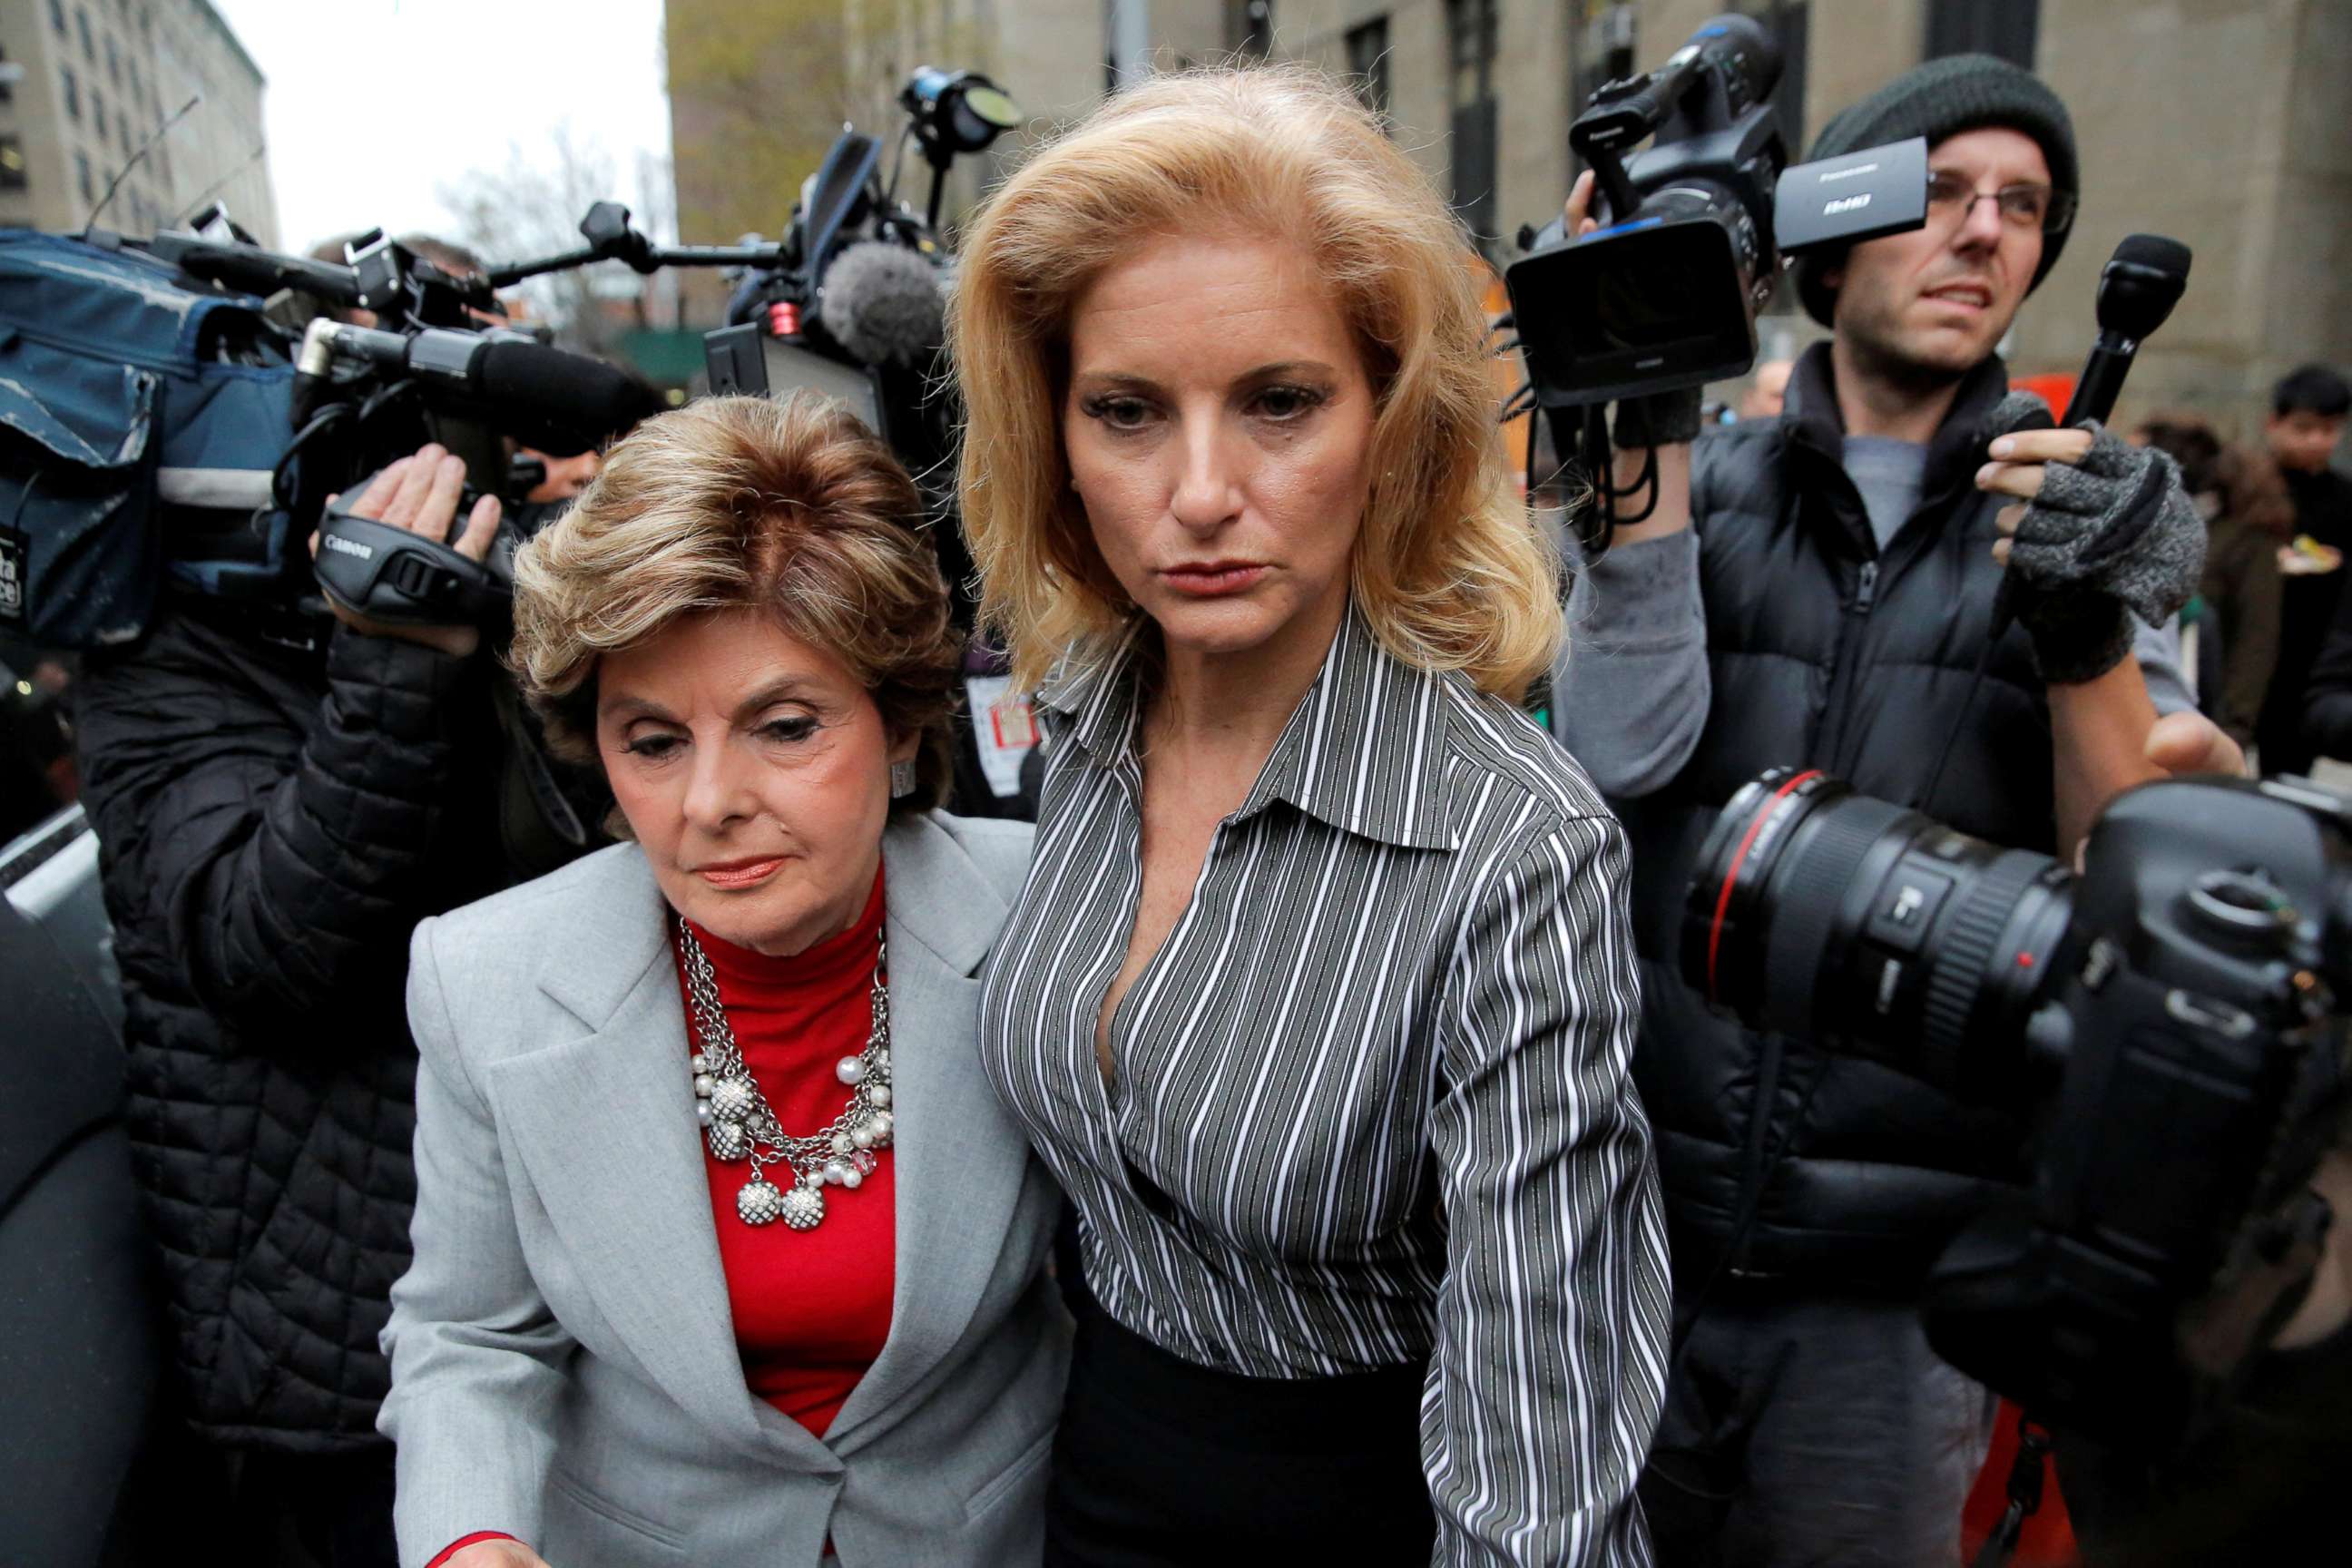 PHOTO: Summer Zervos, right, leaves New York State Supreme Court with attorney Gloria Allred after a hearing on the defamation case against President Donald Trump in Manhattan on Dec. 5, 2017.